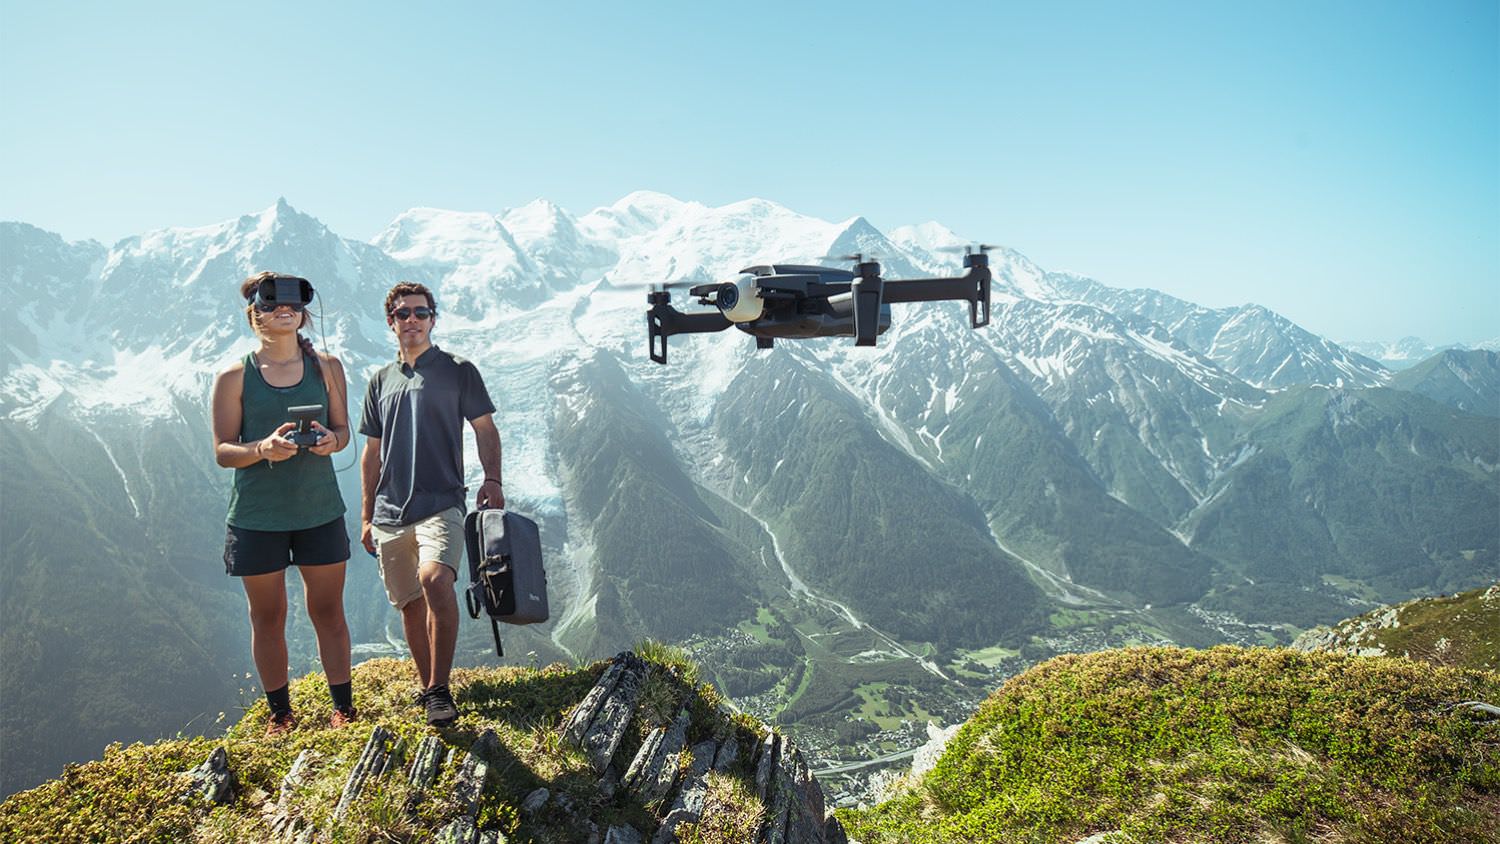 French drone maker Parrot launches ANAFI FPV